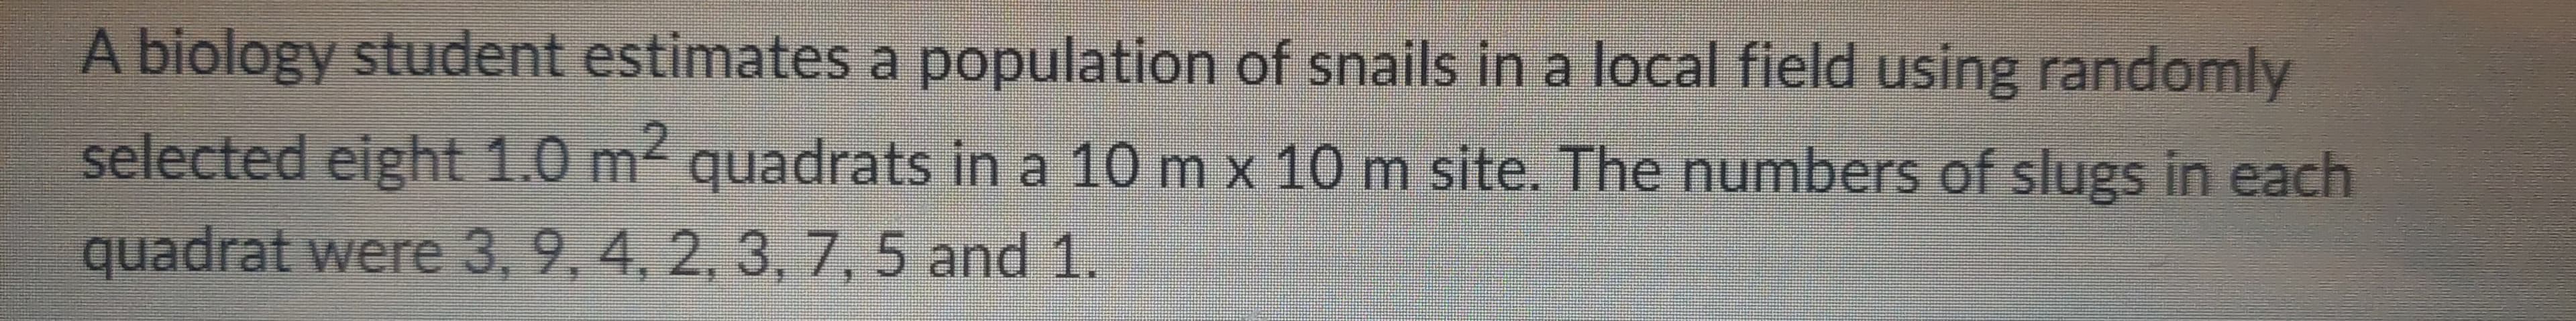 A biology student estimates a population of snails in a local field using randomly
selected eight 1.0 m² quadrats in a 10 m x 10 m site. The numbers of slugs in each
quadrat were 3, 9, 4, 2, 3, 7, 5 and 1.